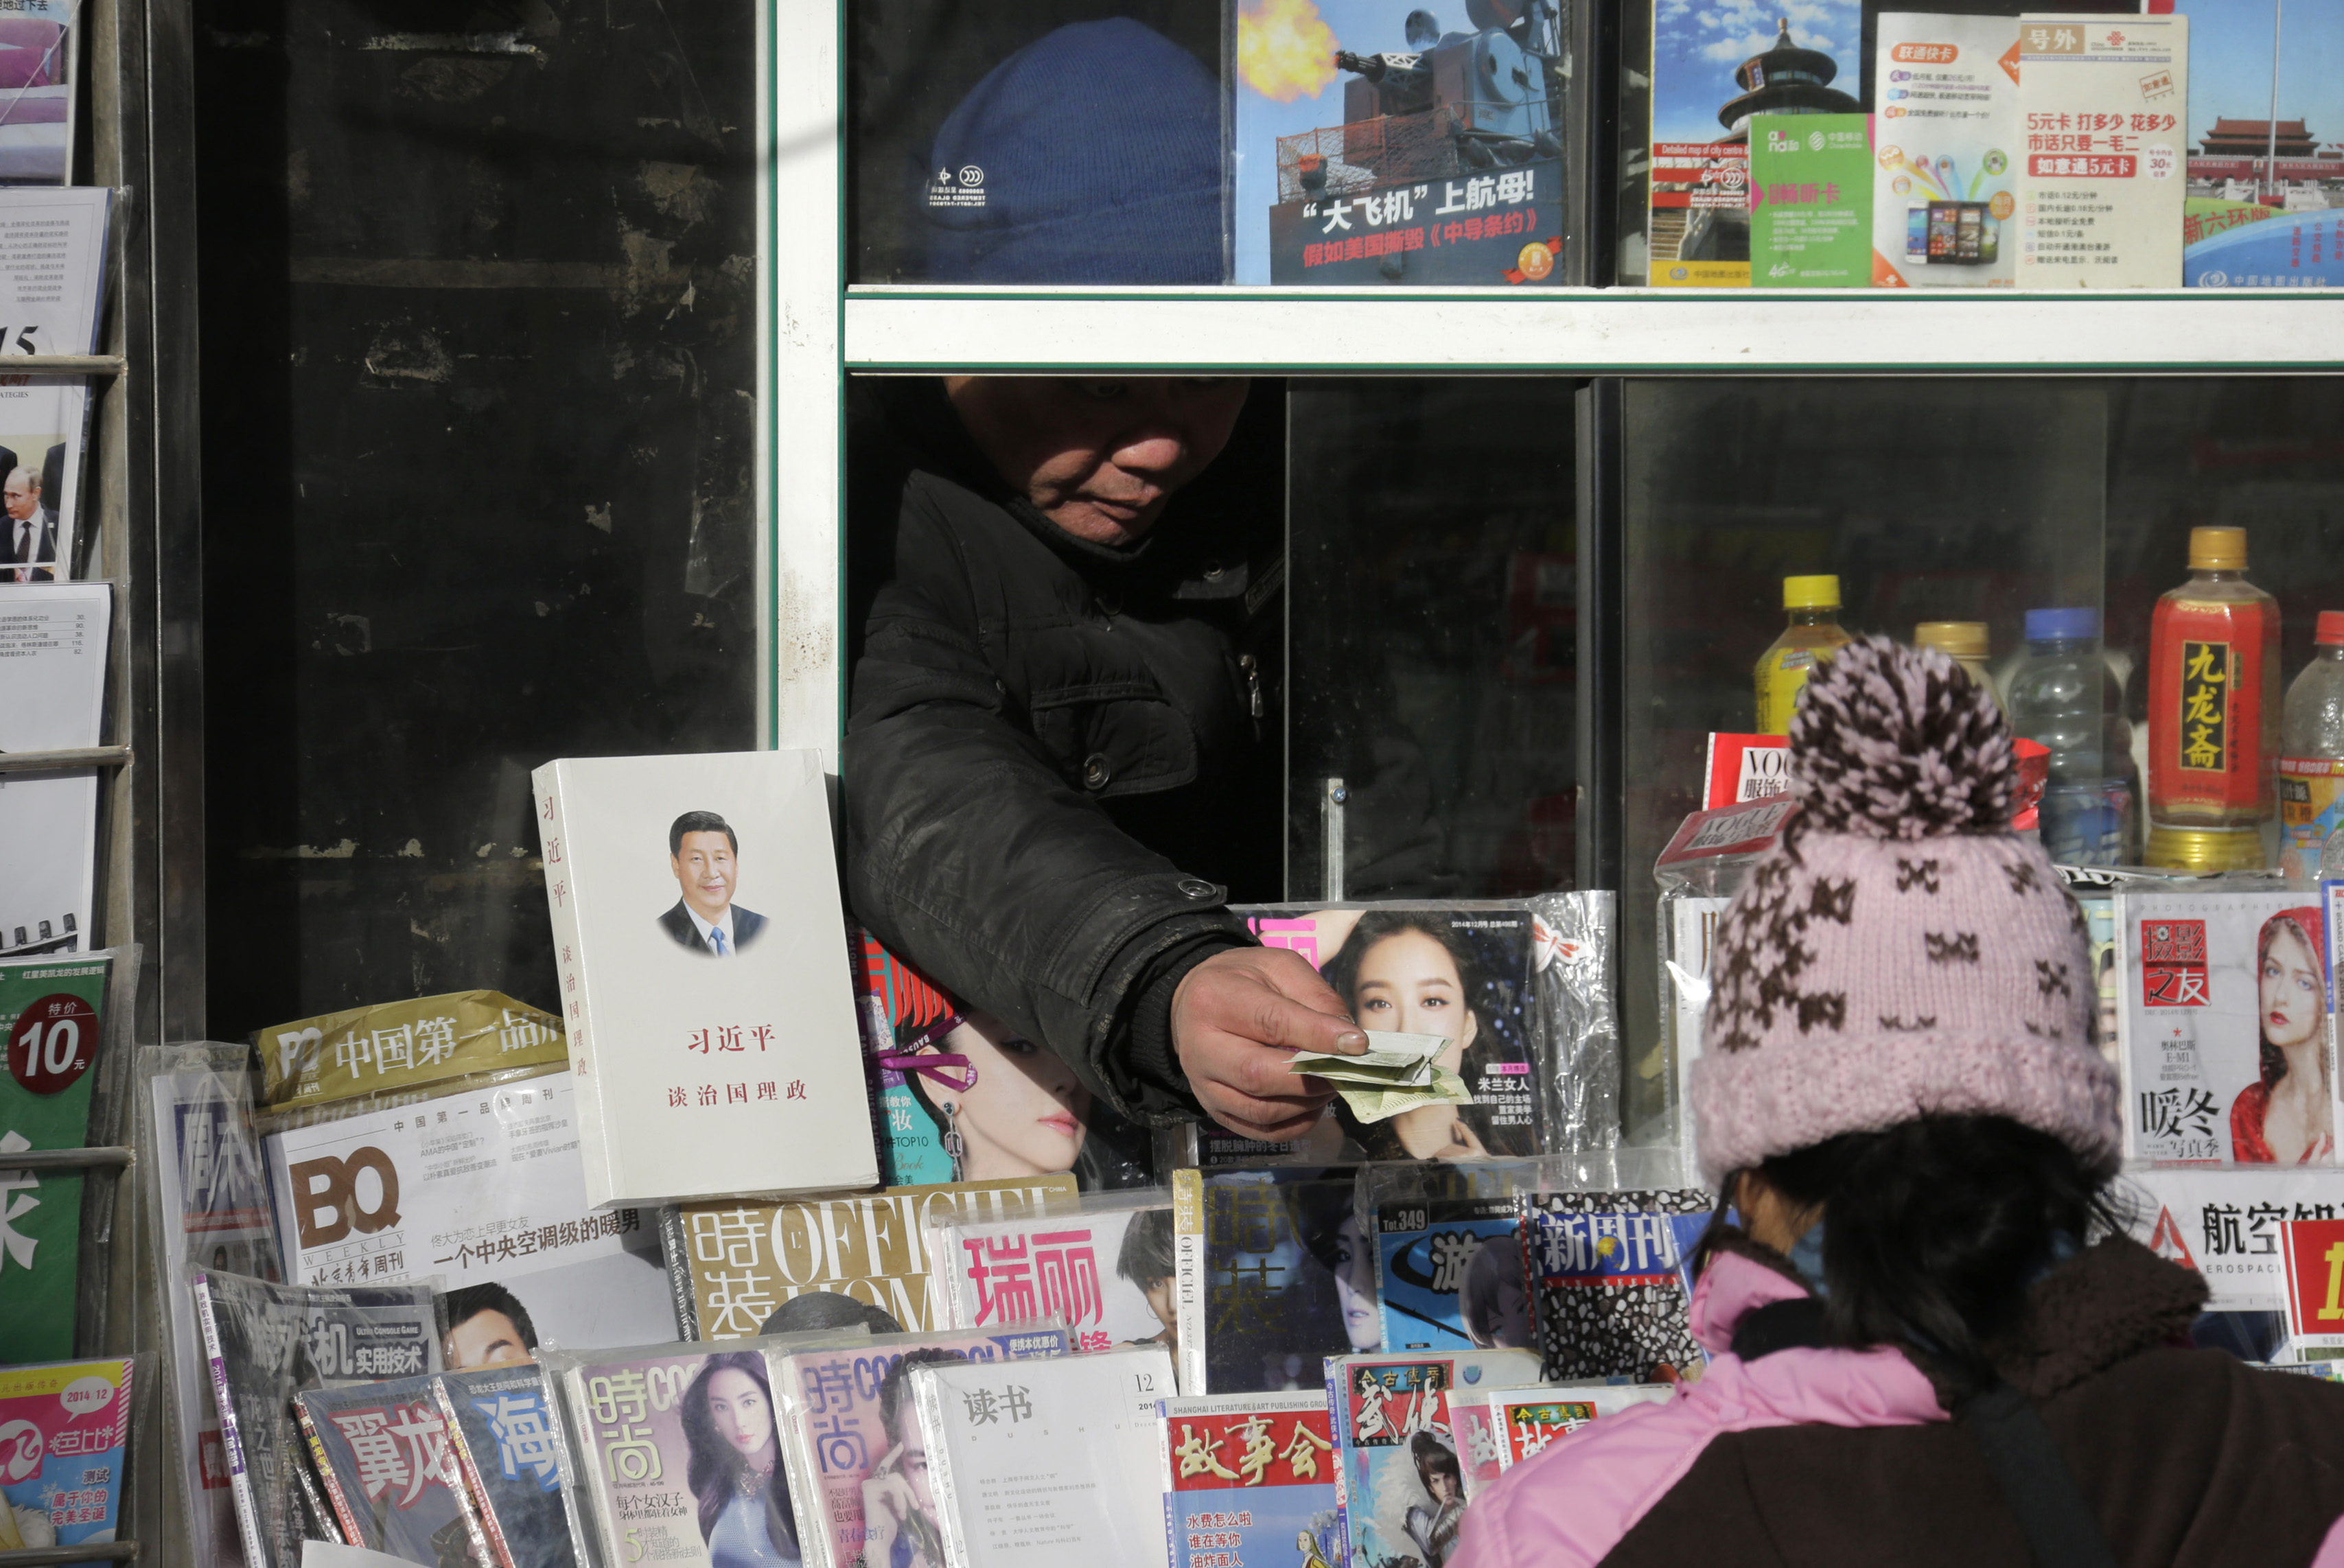 A newsstand vendor returns change to a customer near a book titled "Xi Jinping: The governance of China" displayed on sale in central Beijing